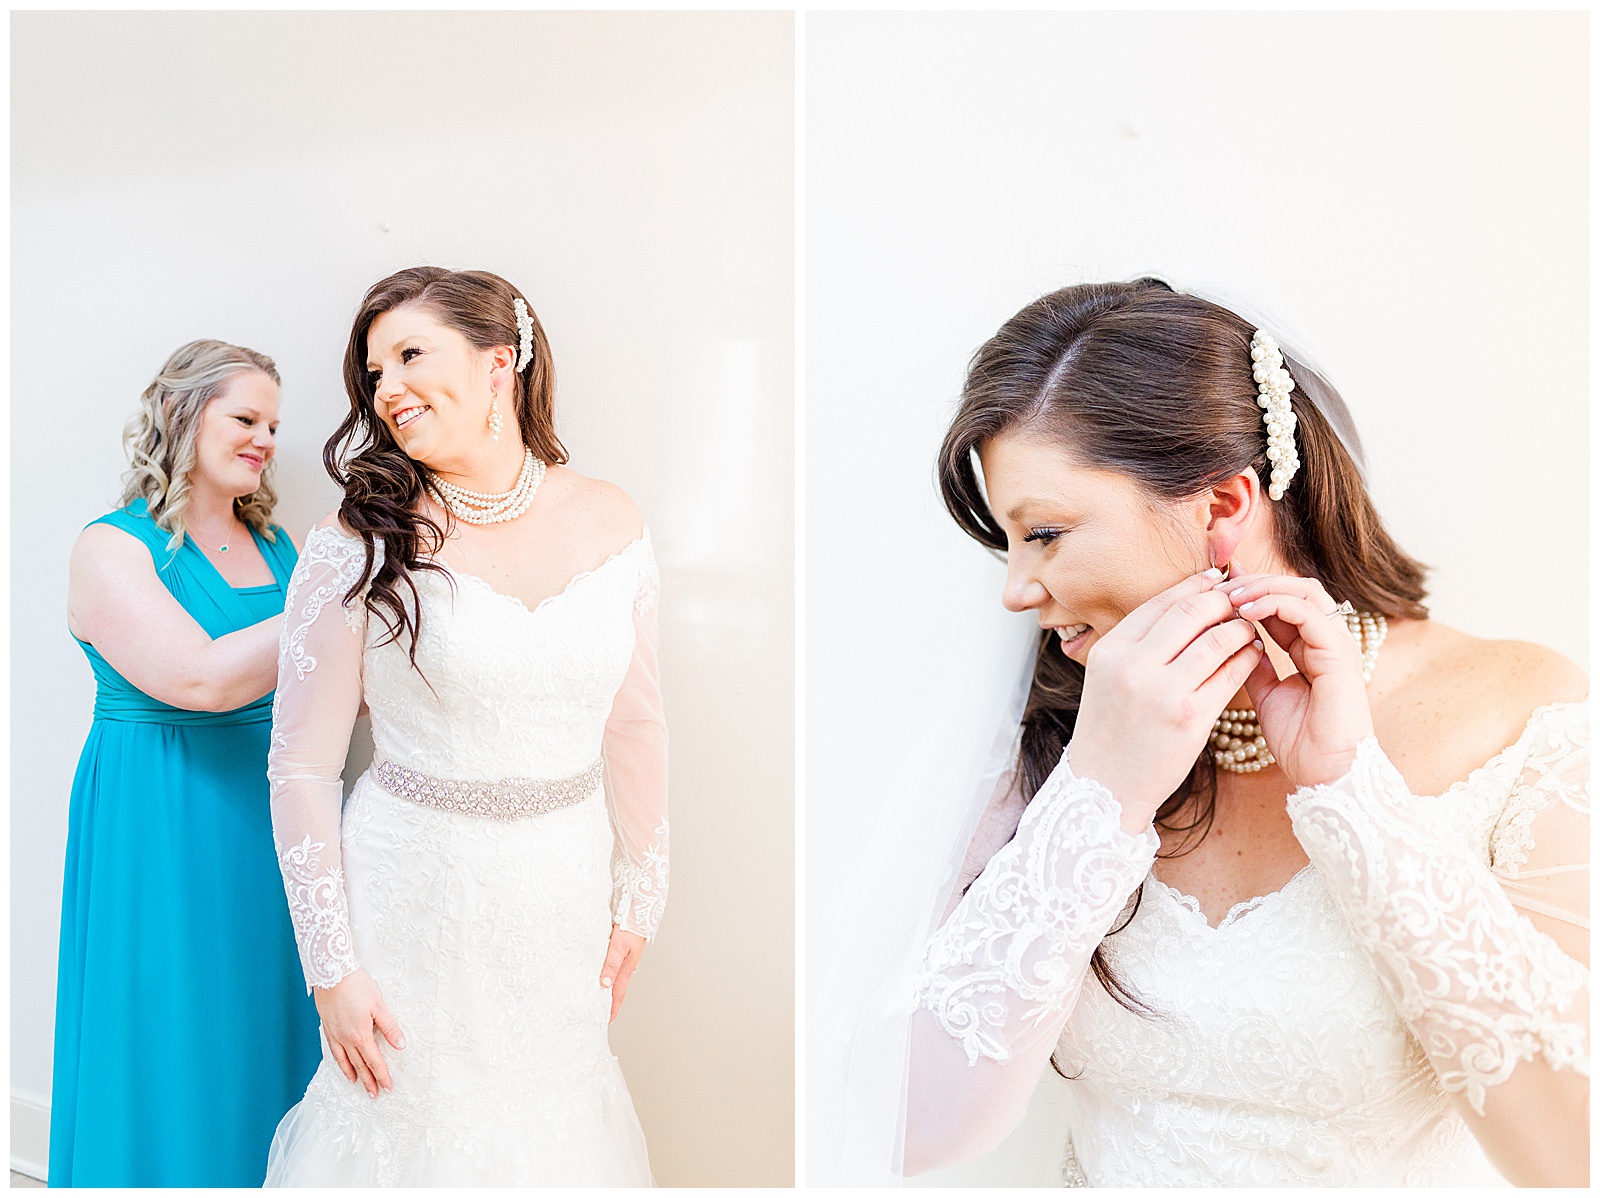 💍 bride getting ready putting on earrings in lace wedding dress with rhinestone belt rhinestone barrette in hair down with pearls 💍 Bright Colorful Summer City Wedding in Charlotte, NC with Taryn and Ryan | Kevyn Dixon Photography